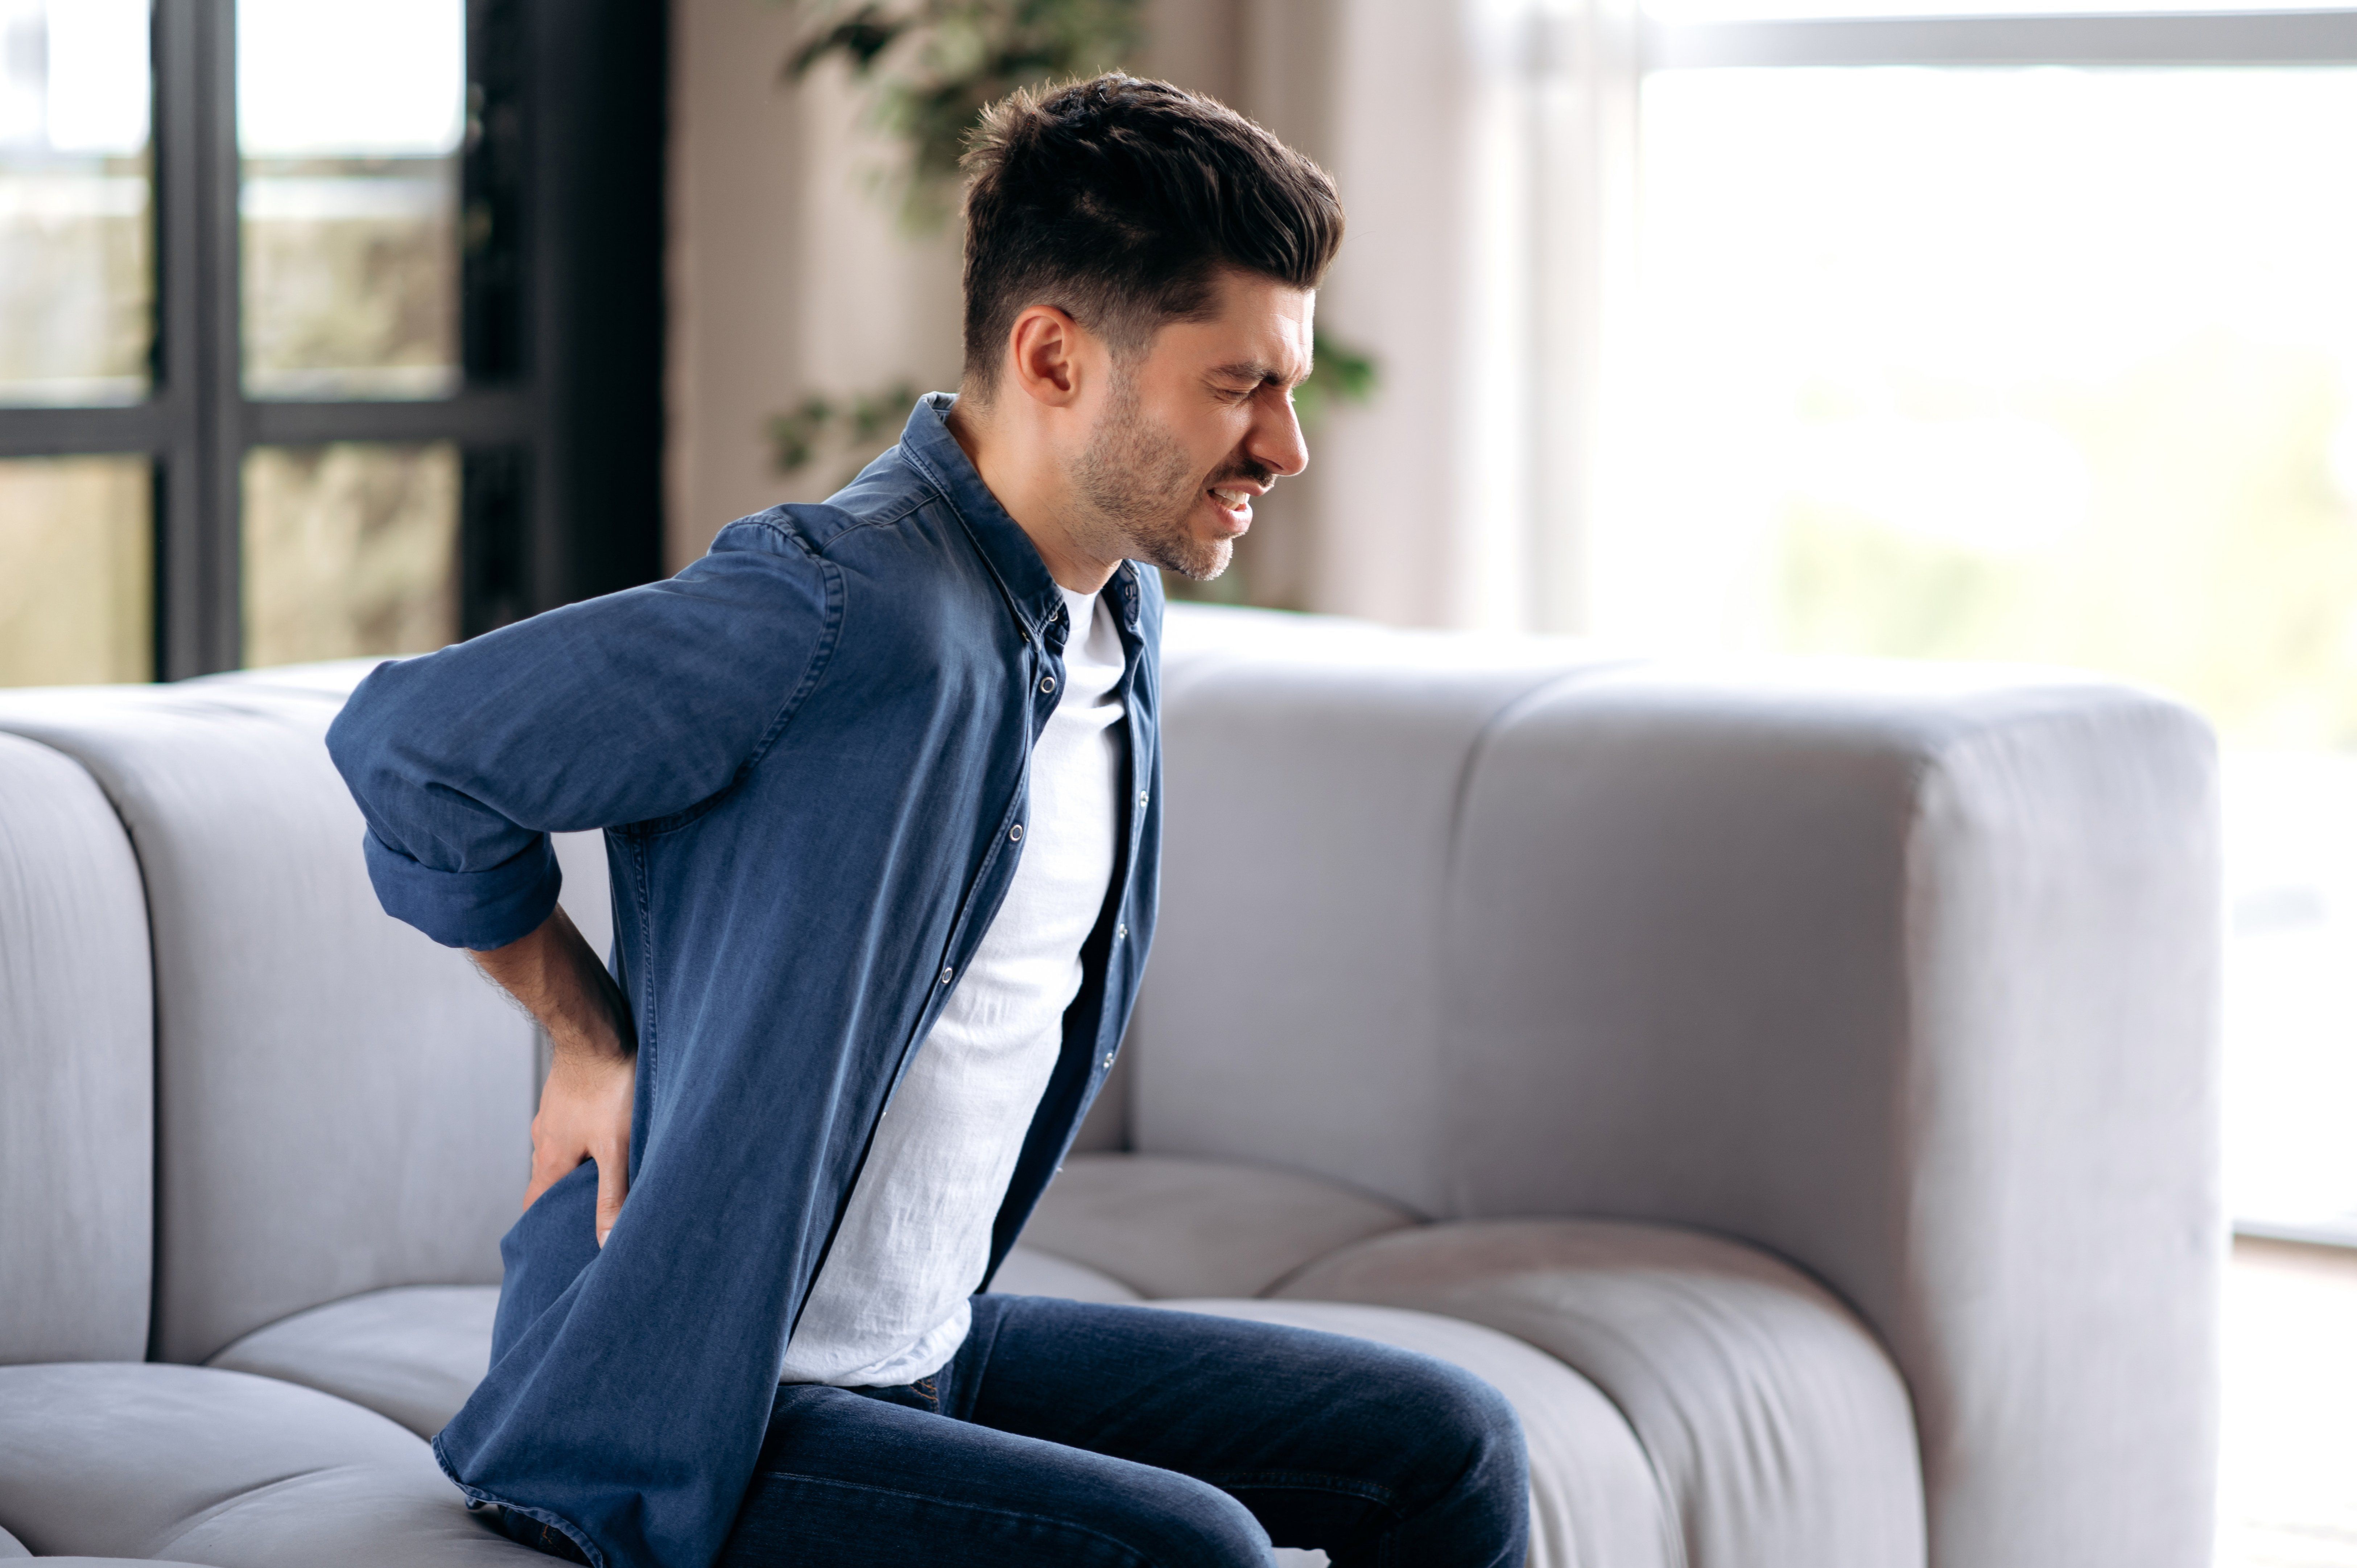 Sciatica Pain: The Best Way to Identify and Treat